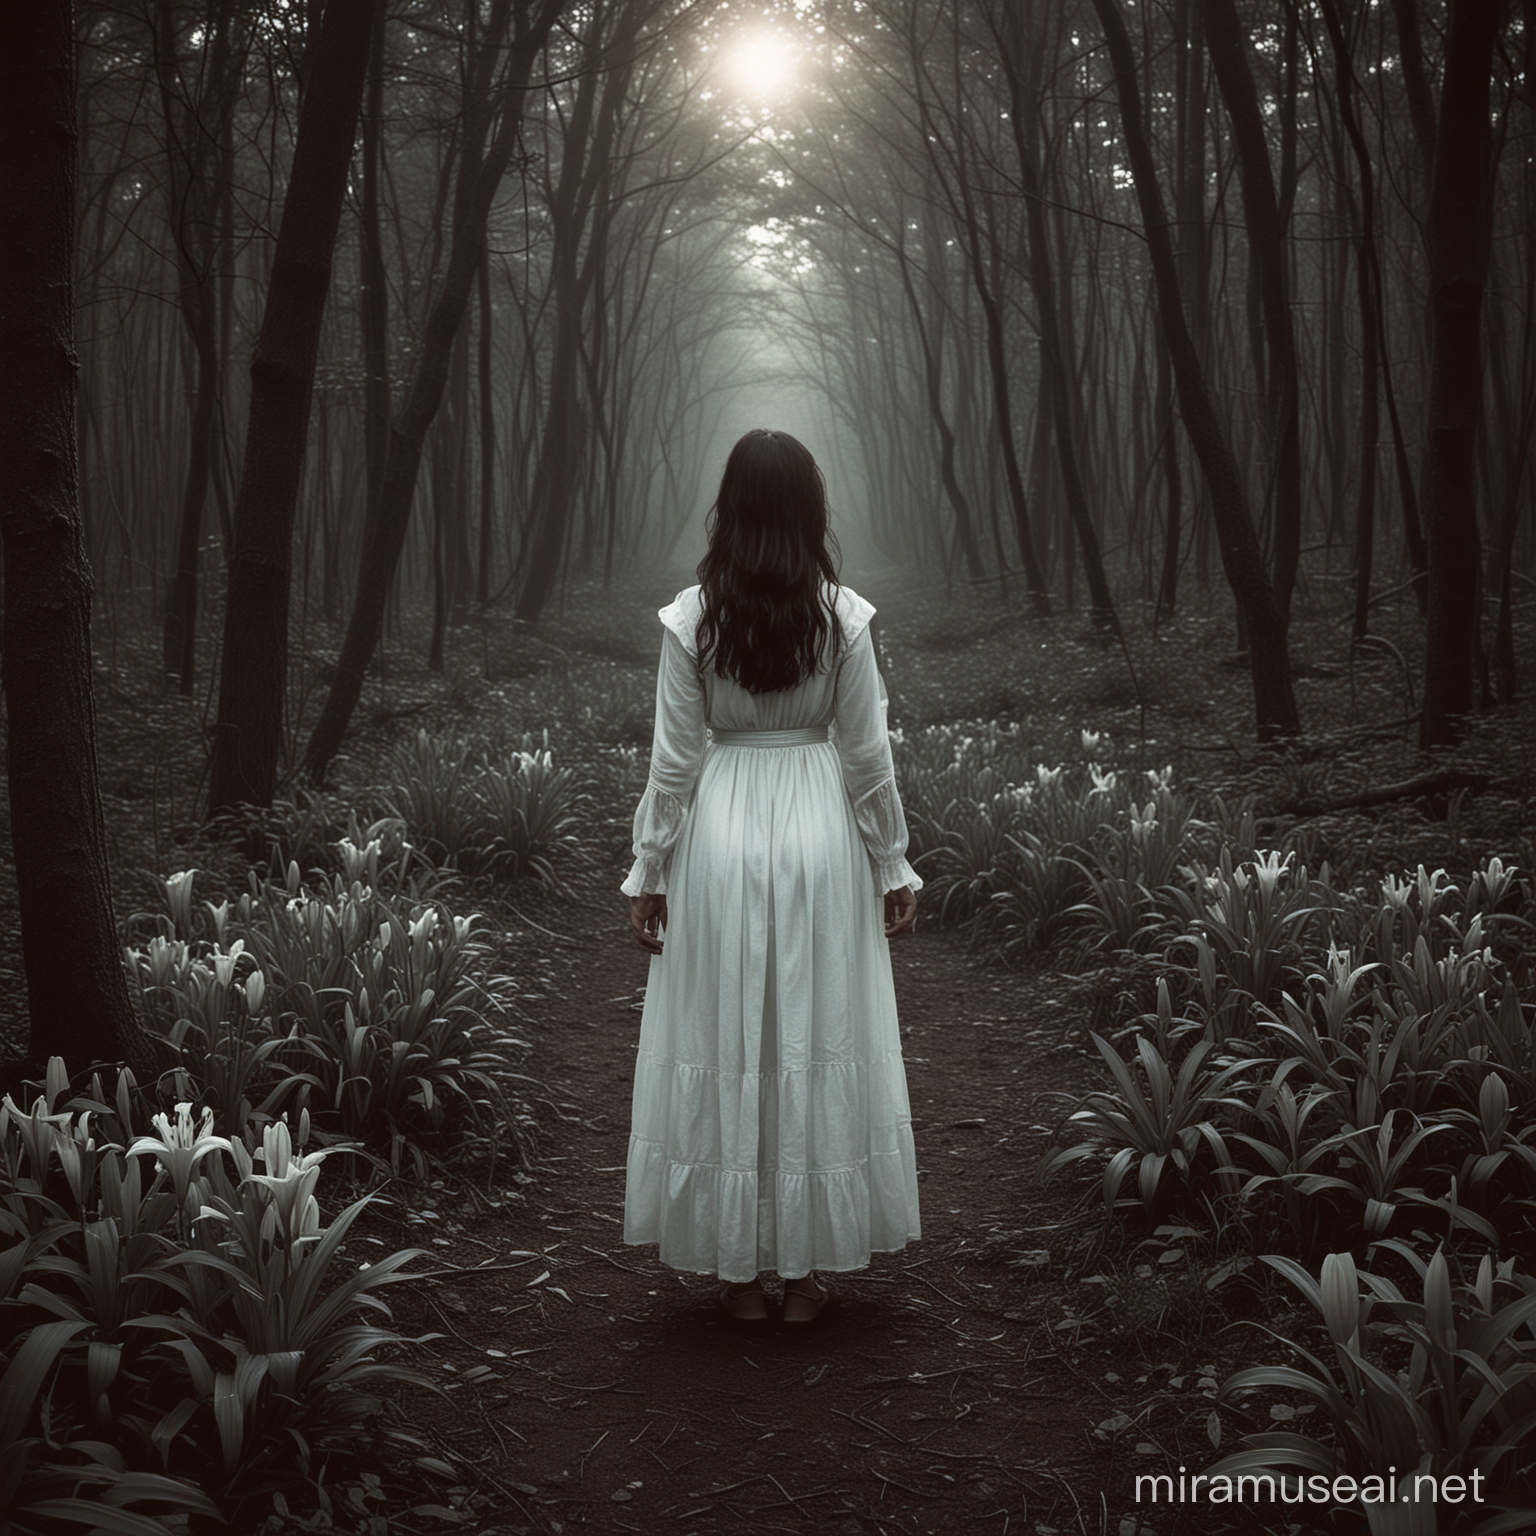 "Create an image inspired by the lyrics: 'Lily was a little girl afraid of the big, wide world...' depicting Lily in a forest, feeling both fear and allure as she encounters a mysterious entity offering her everything she desires. Capture the tension between her desire for safety and the unknown danger lurking in the darkness. Incorporate elements of magic and hypnotism, with the entity beckoning her to 'Just let me in, ooh.'"